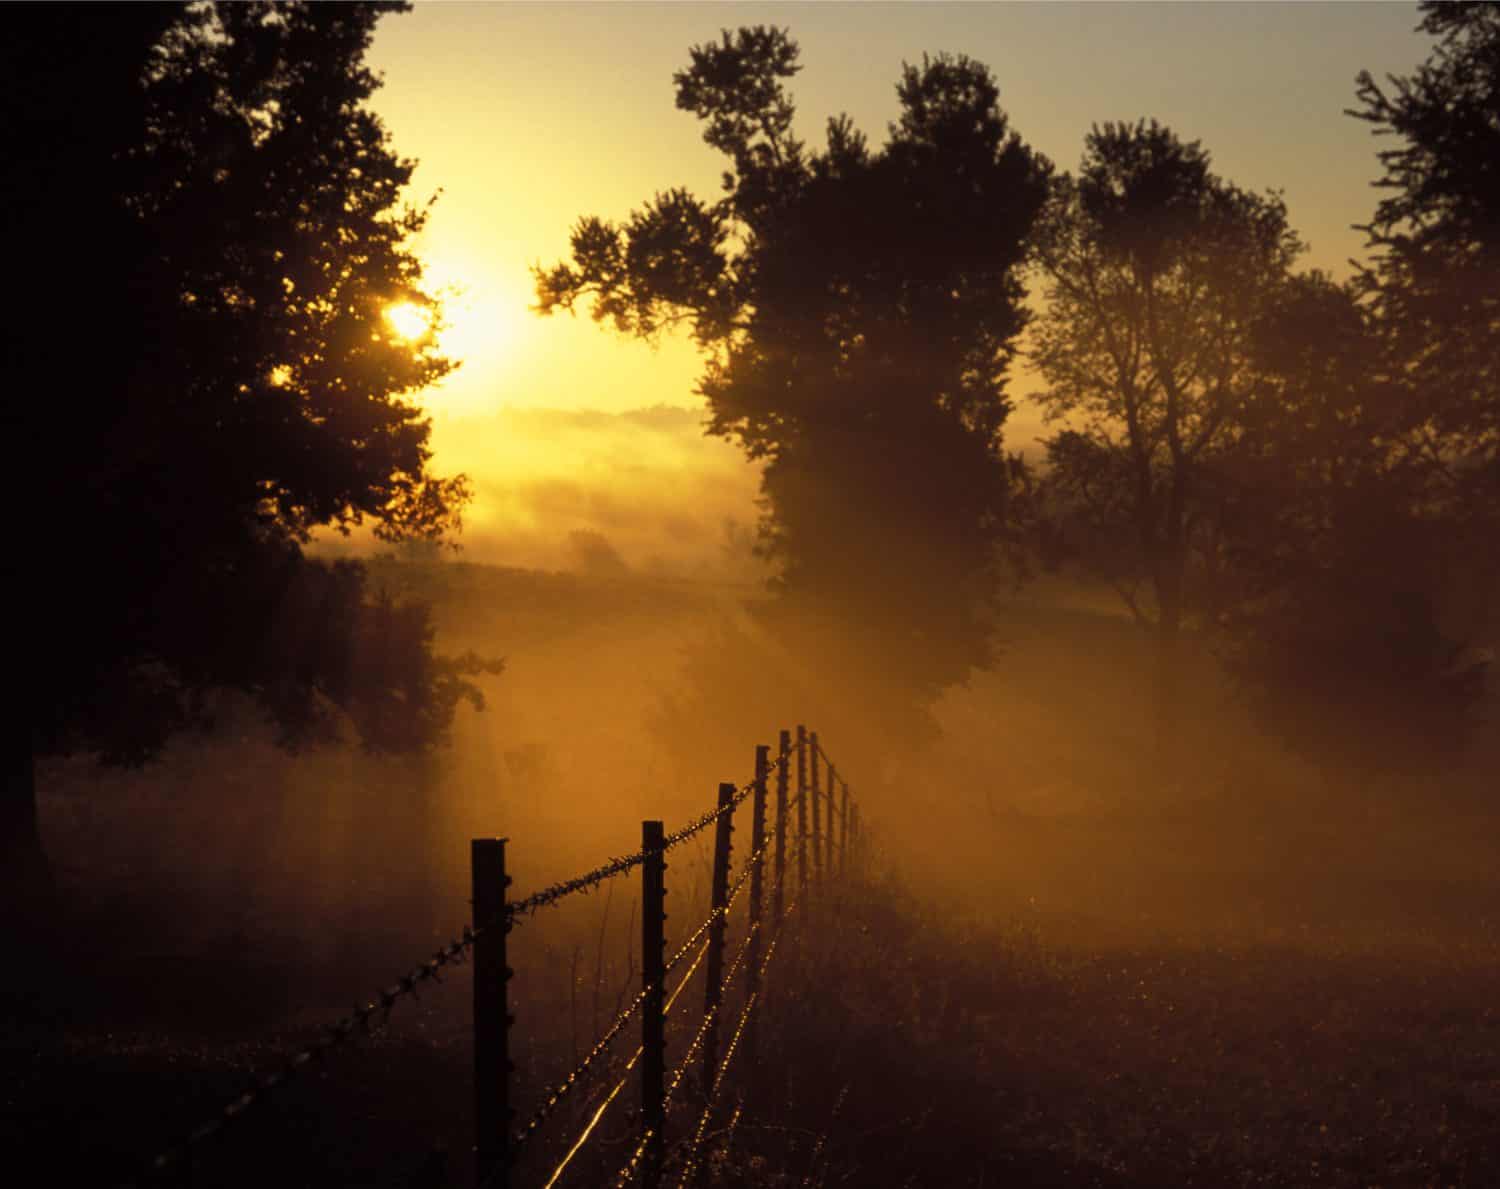 Sunrise through the trees and barbed wire fence, Boone County, Arkansas